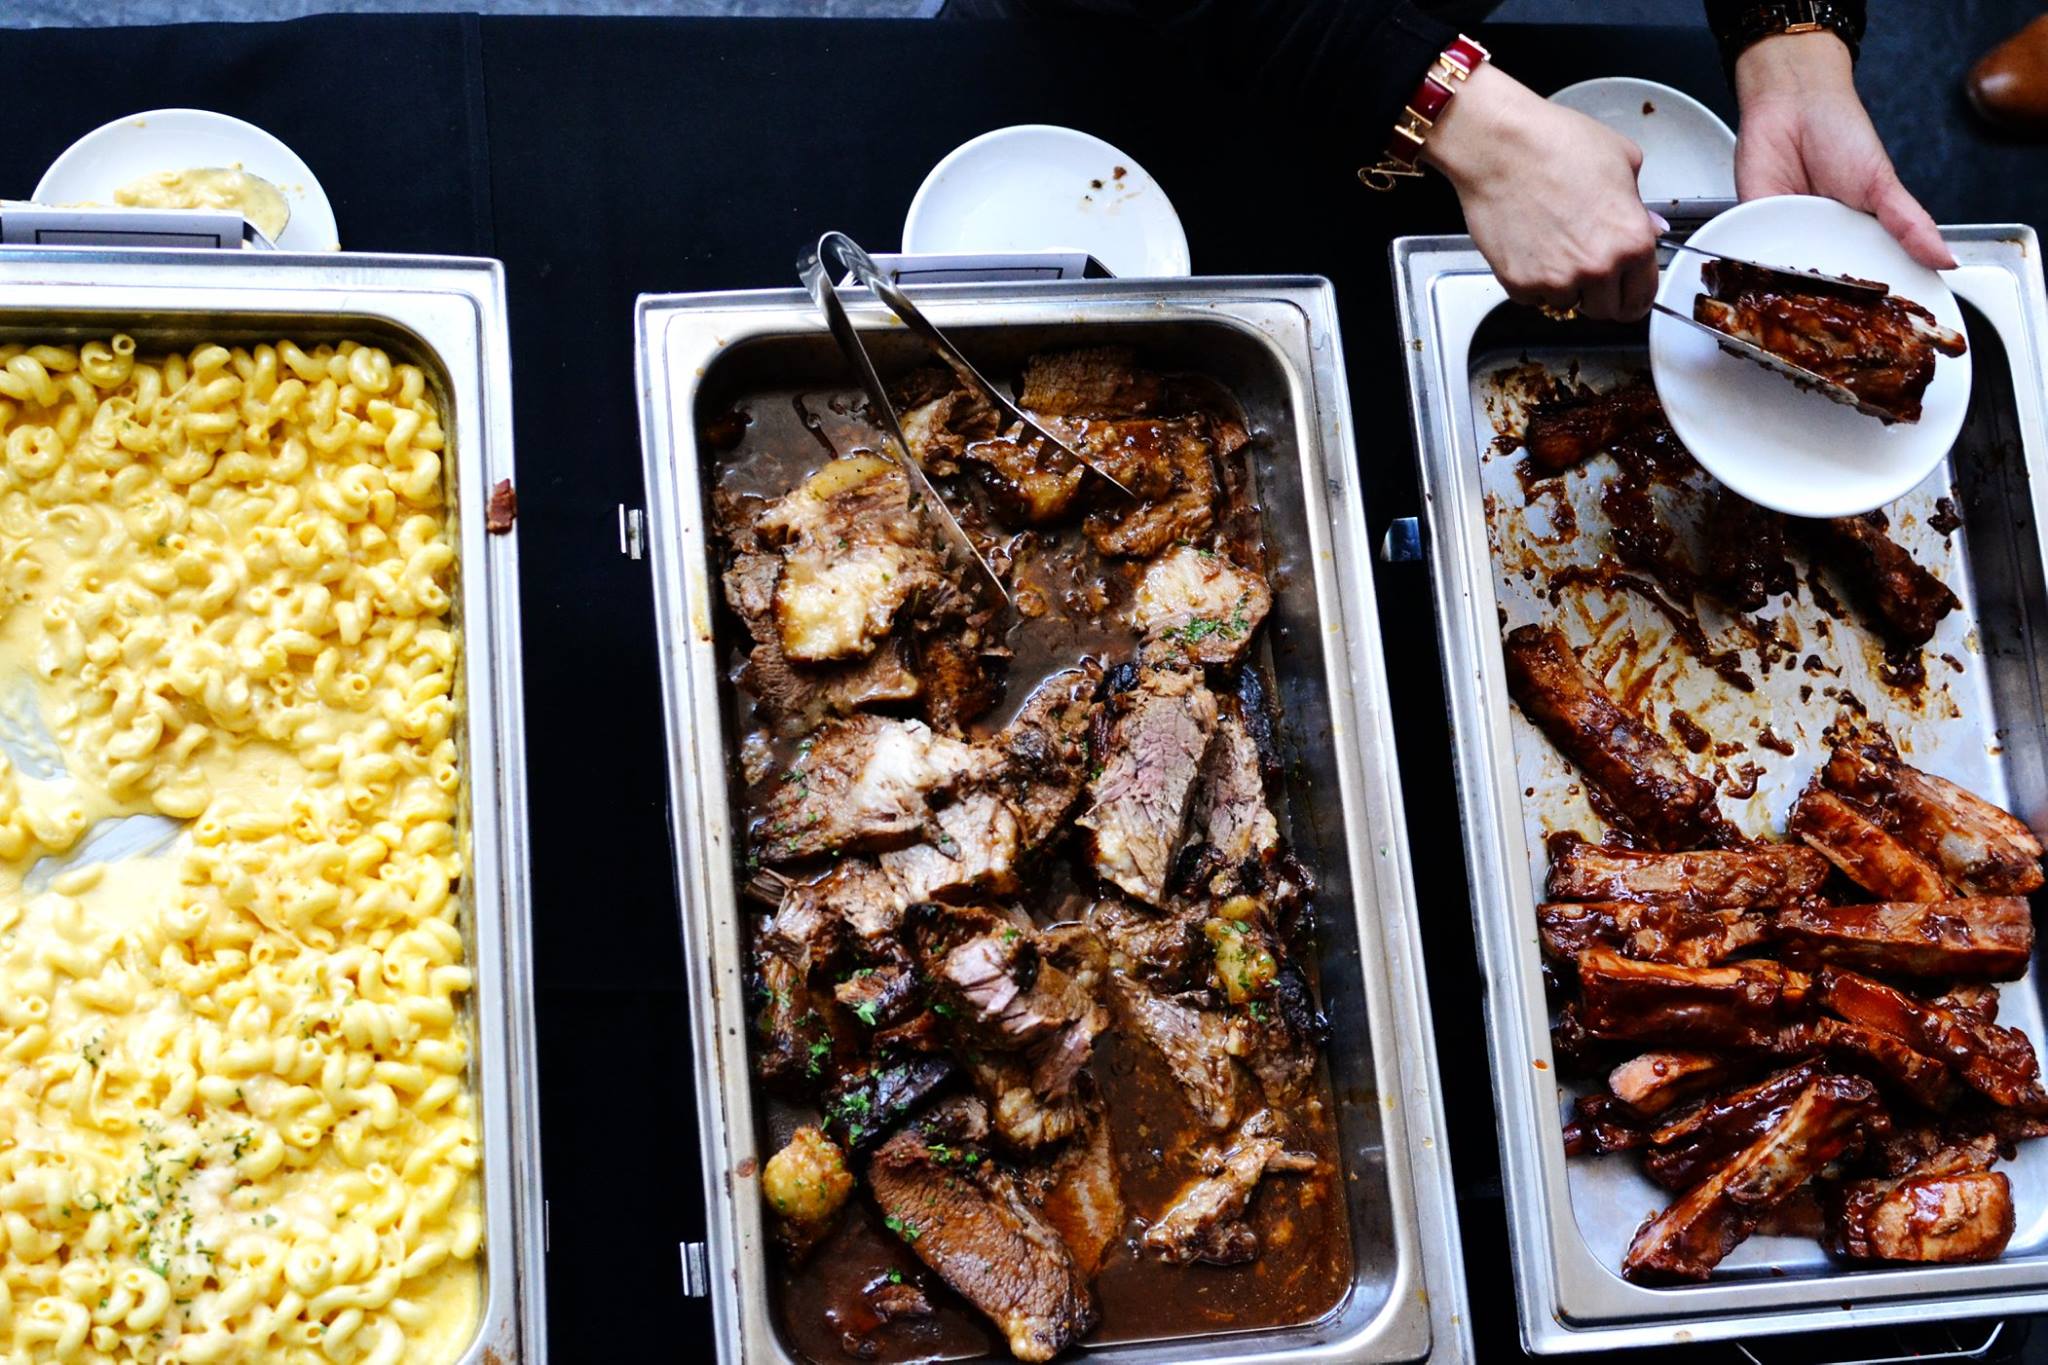 An Evening To Remember at Brix Tavern, BBQ Buffet Style - Where To Eat